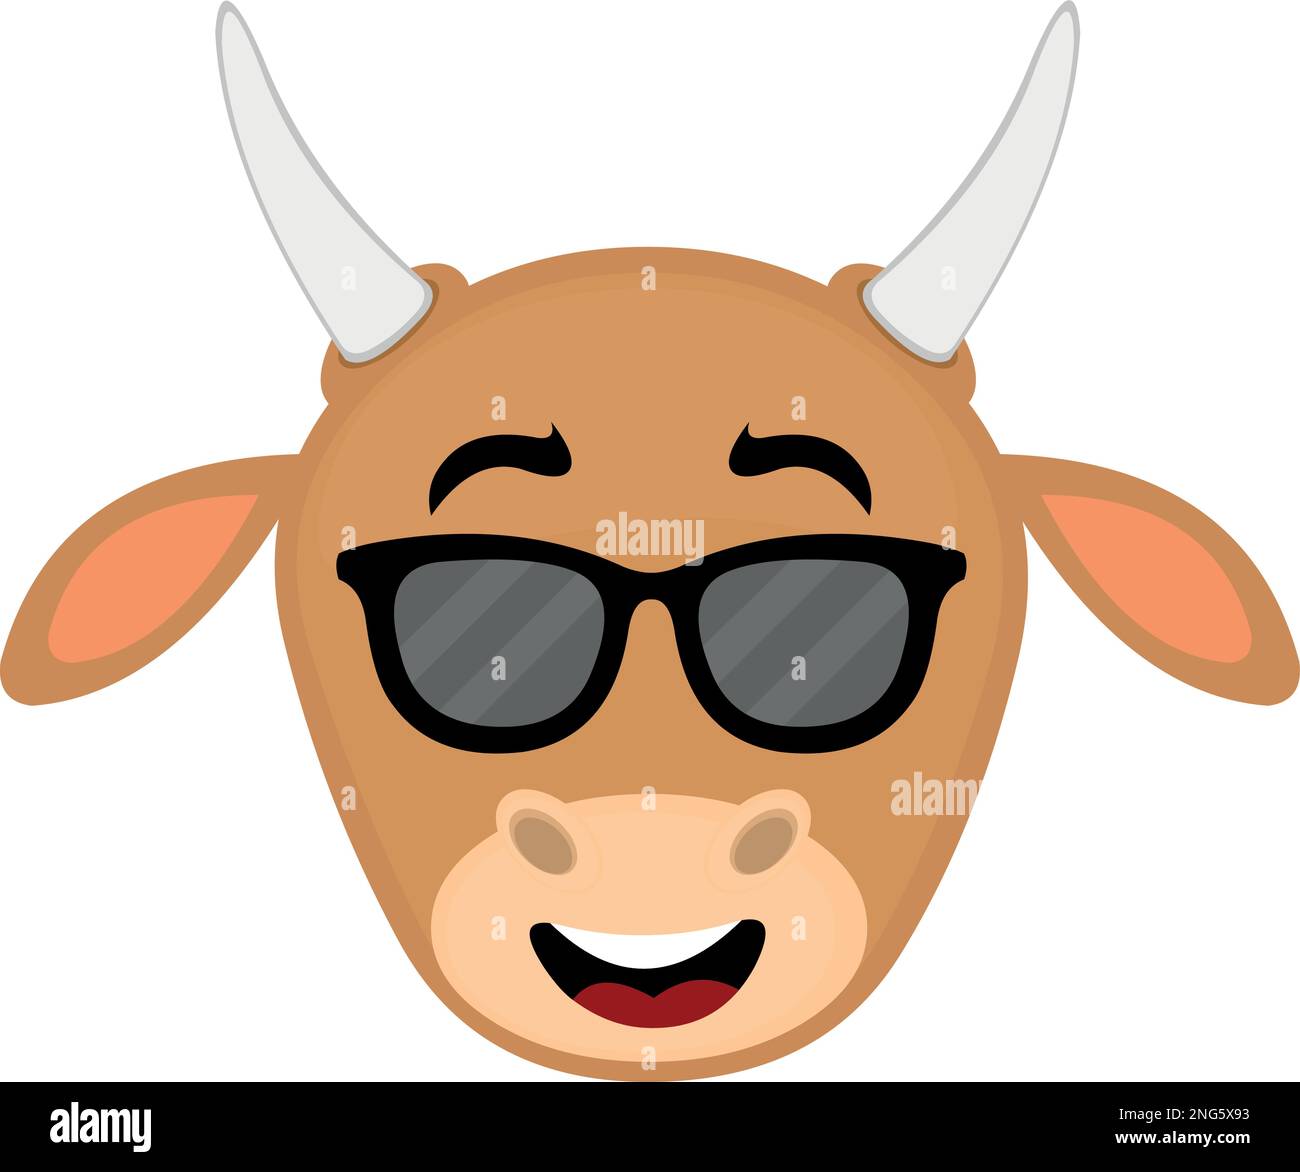 vector illustration face of a cartoon cow with sunglasses Stock Vector